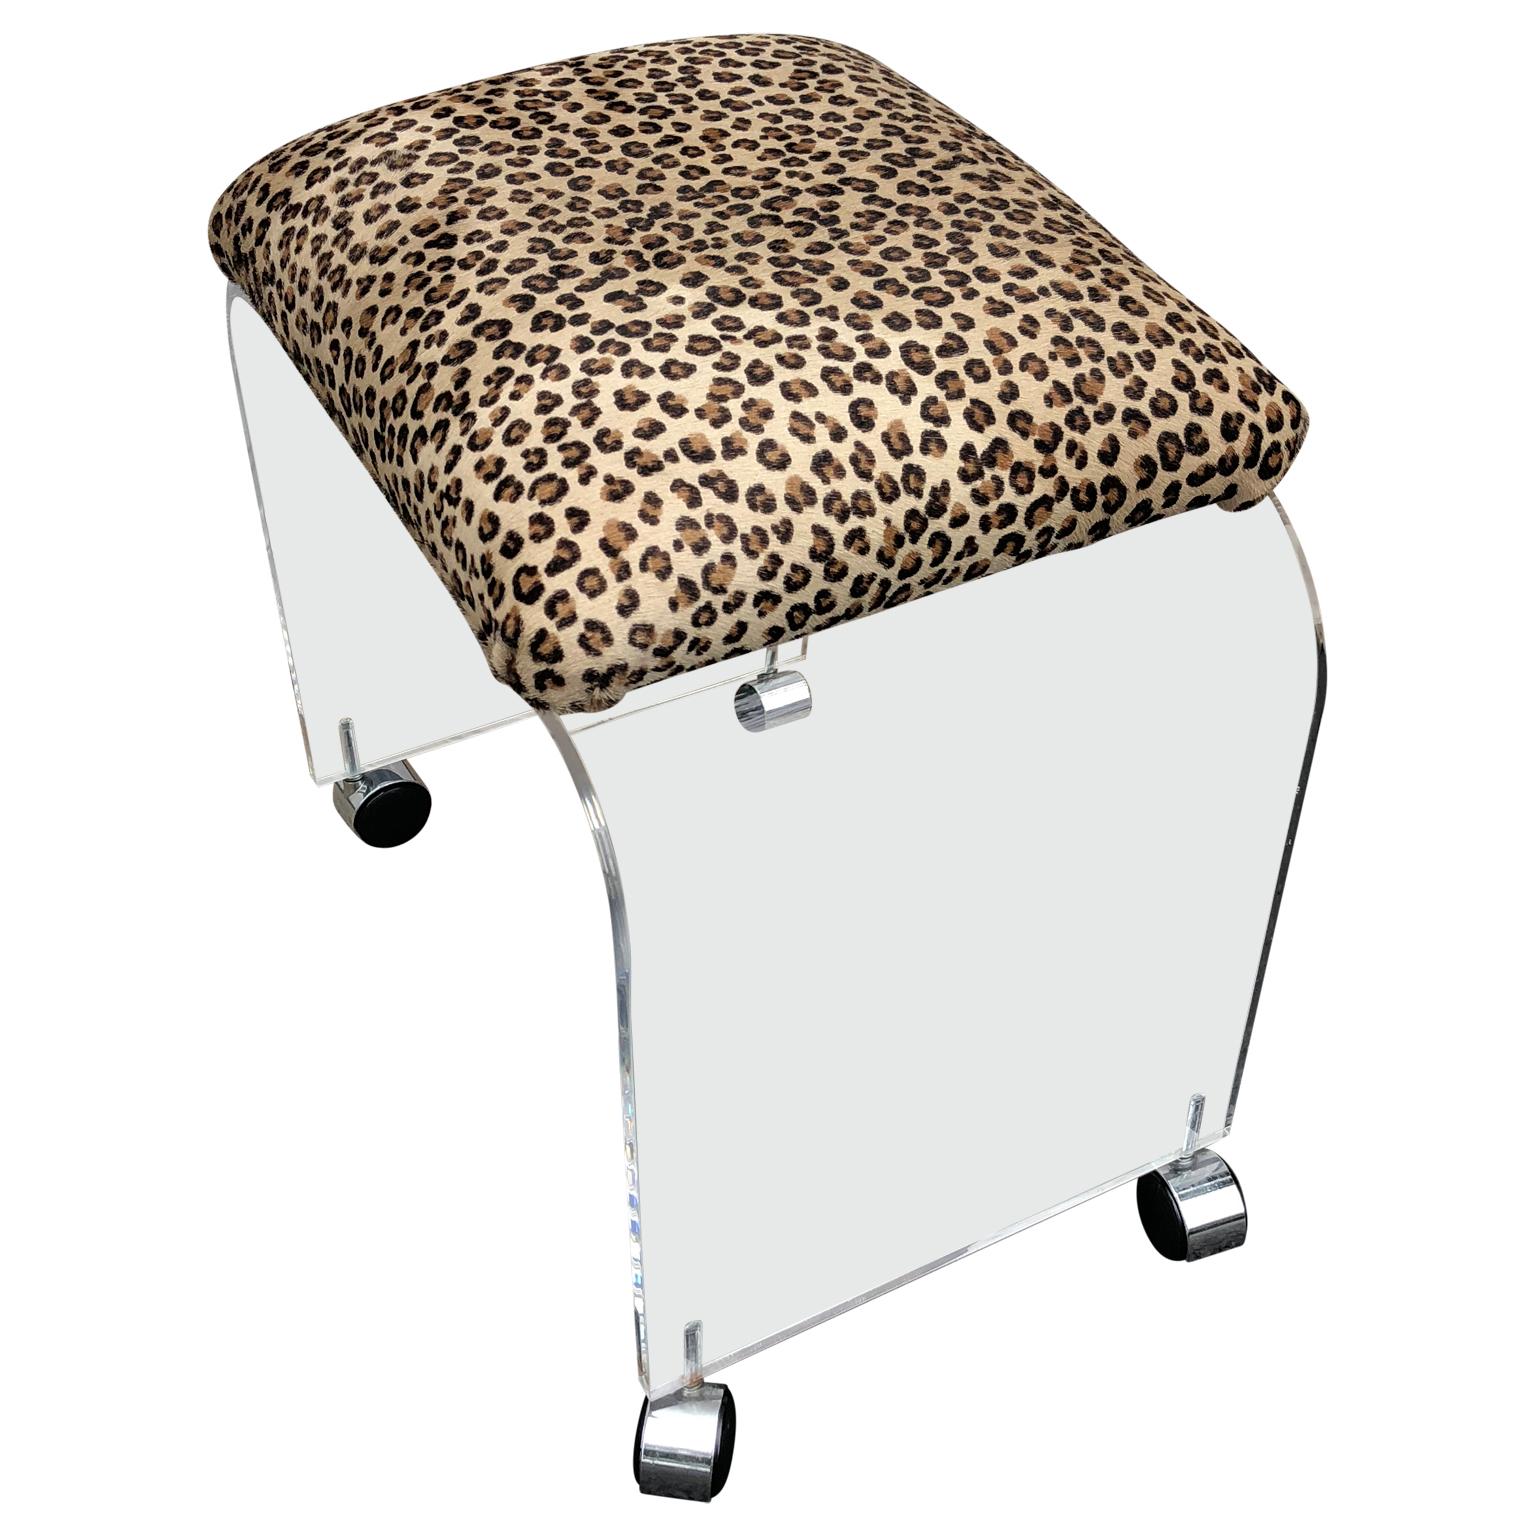 This bench or stool features a thick Lucite design with a waterfall design newly upholstered in faux cheetah fabric. It rests on castors which would make it well suited as a vanity stool. This stool is newly upholstered and on wheels.